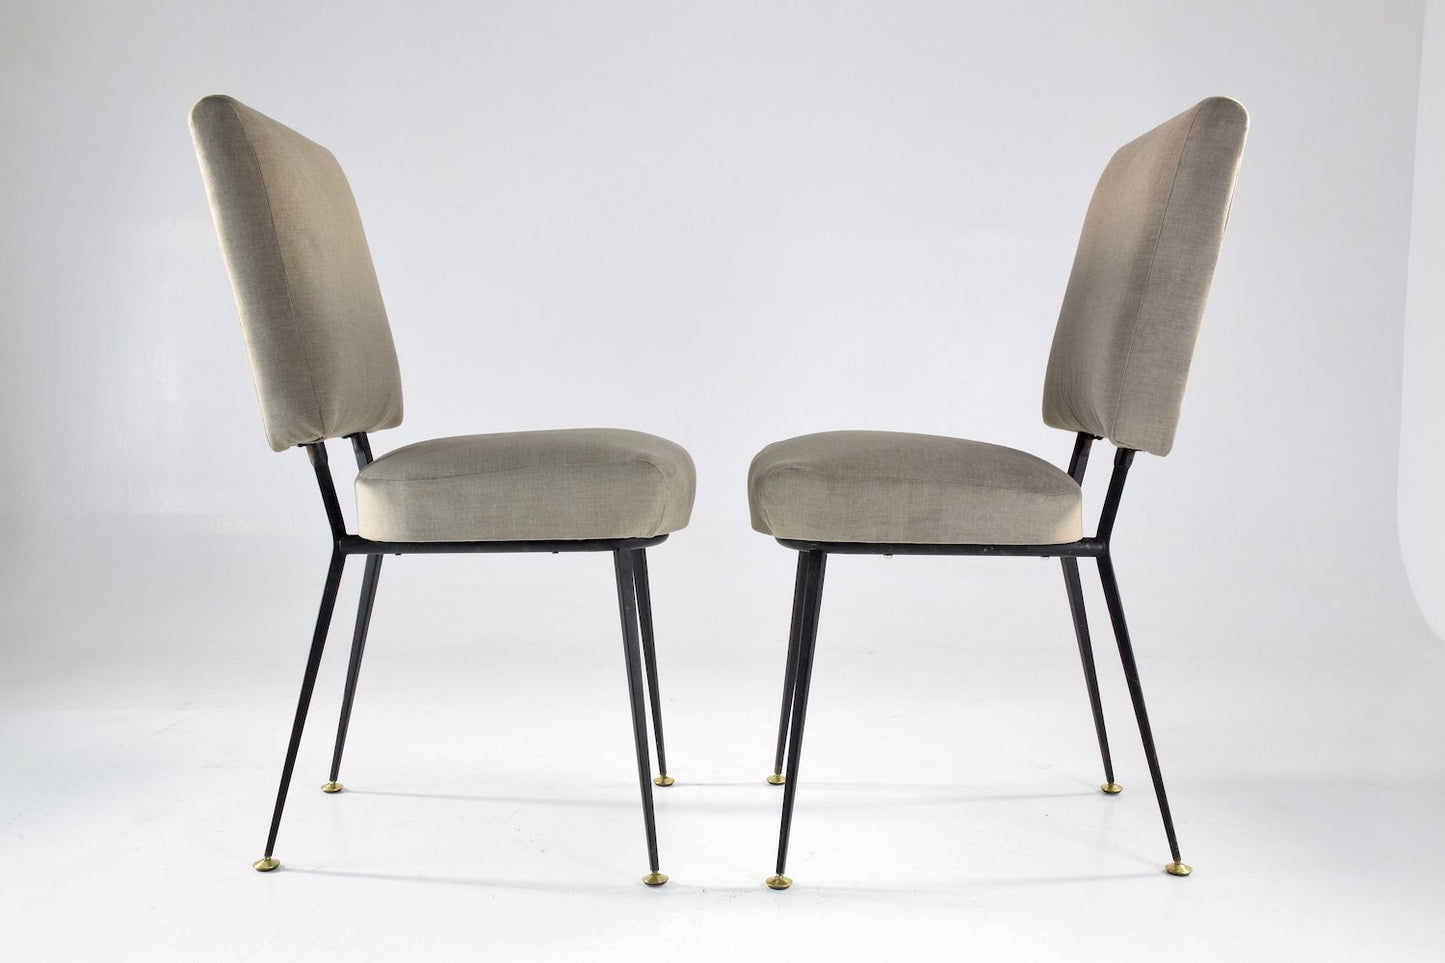 French Pair of steel Chairs, 1960's - Spirit Gallery 